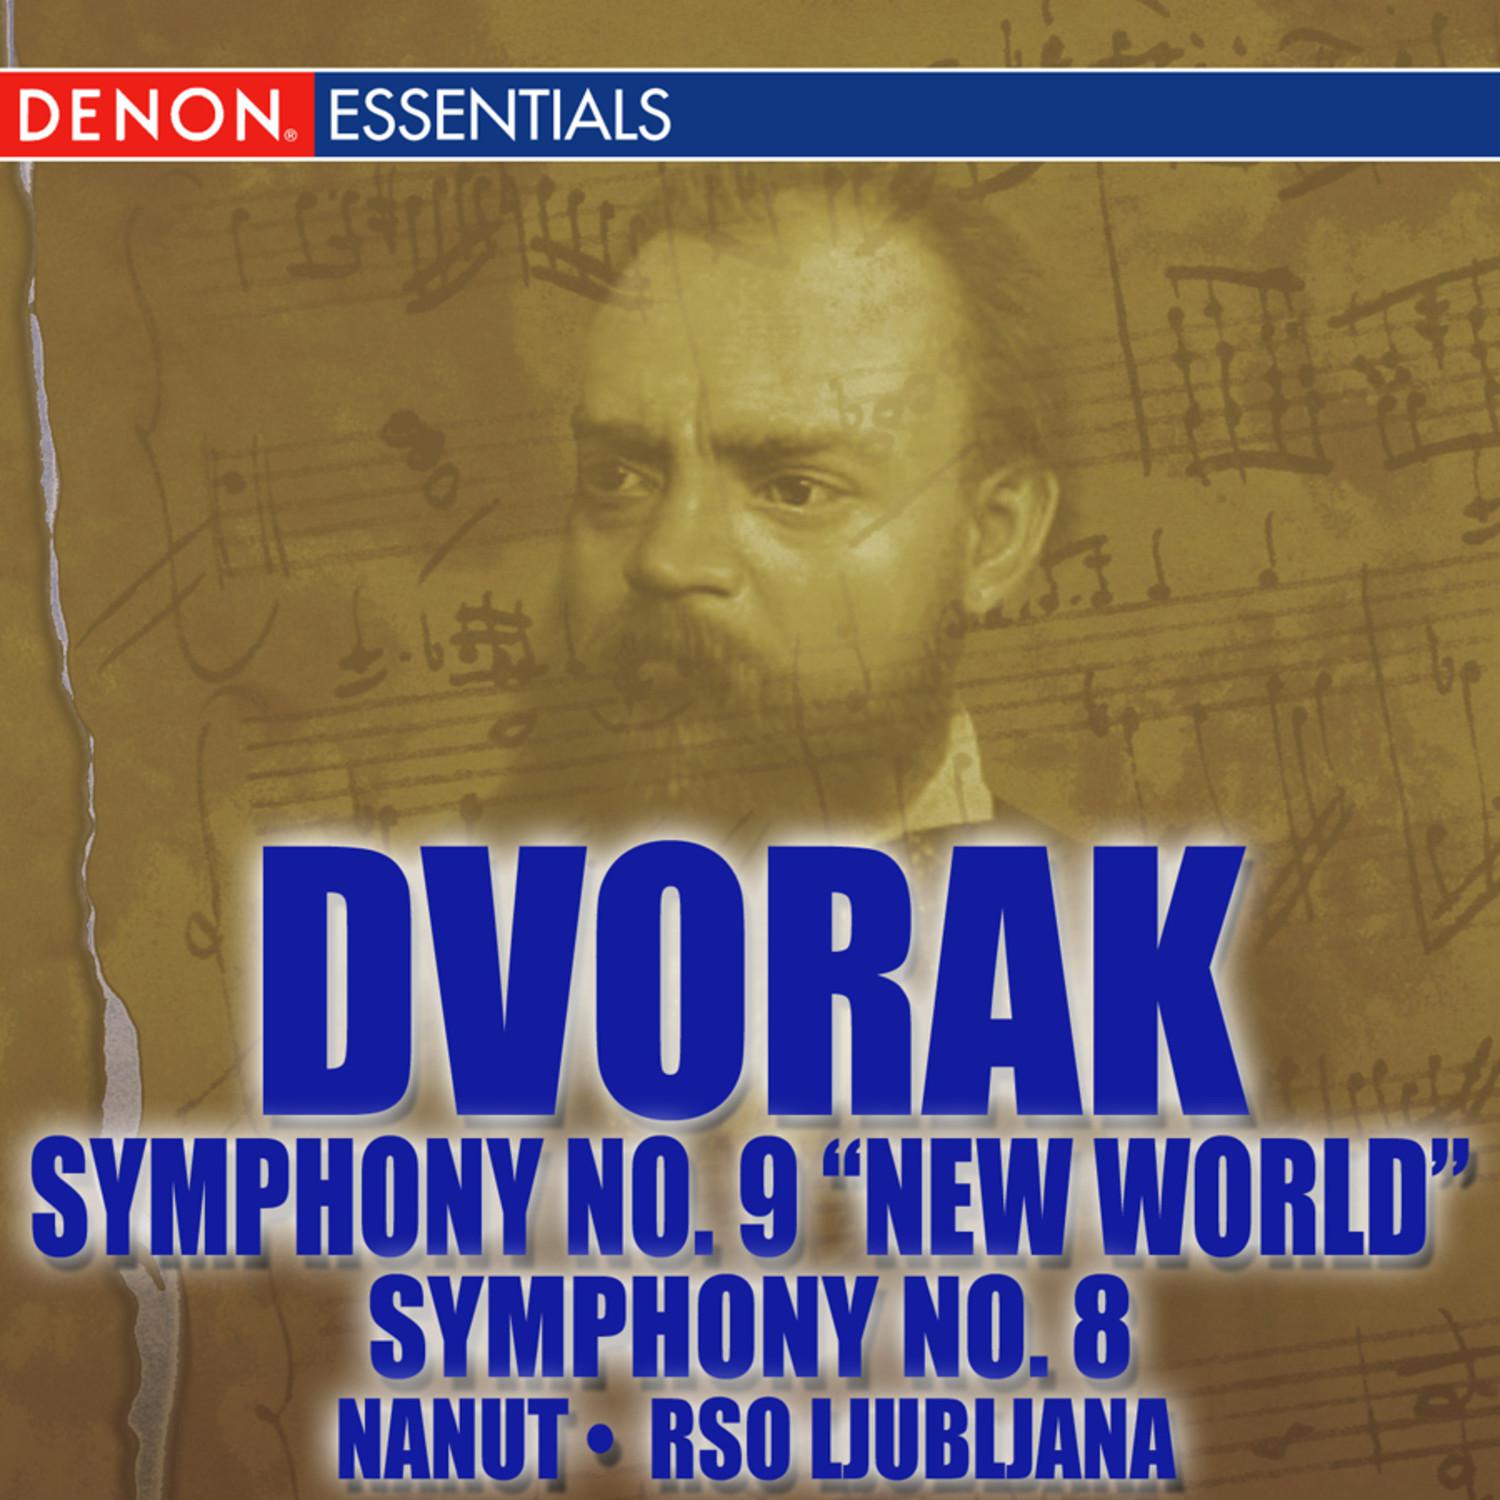 Symphony No. 9 in E Minor "From the New World" Op. 95: III. Scherzo - molto vivace